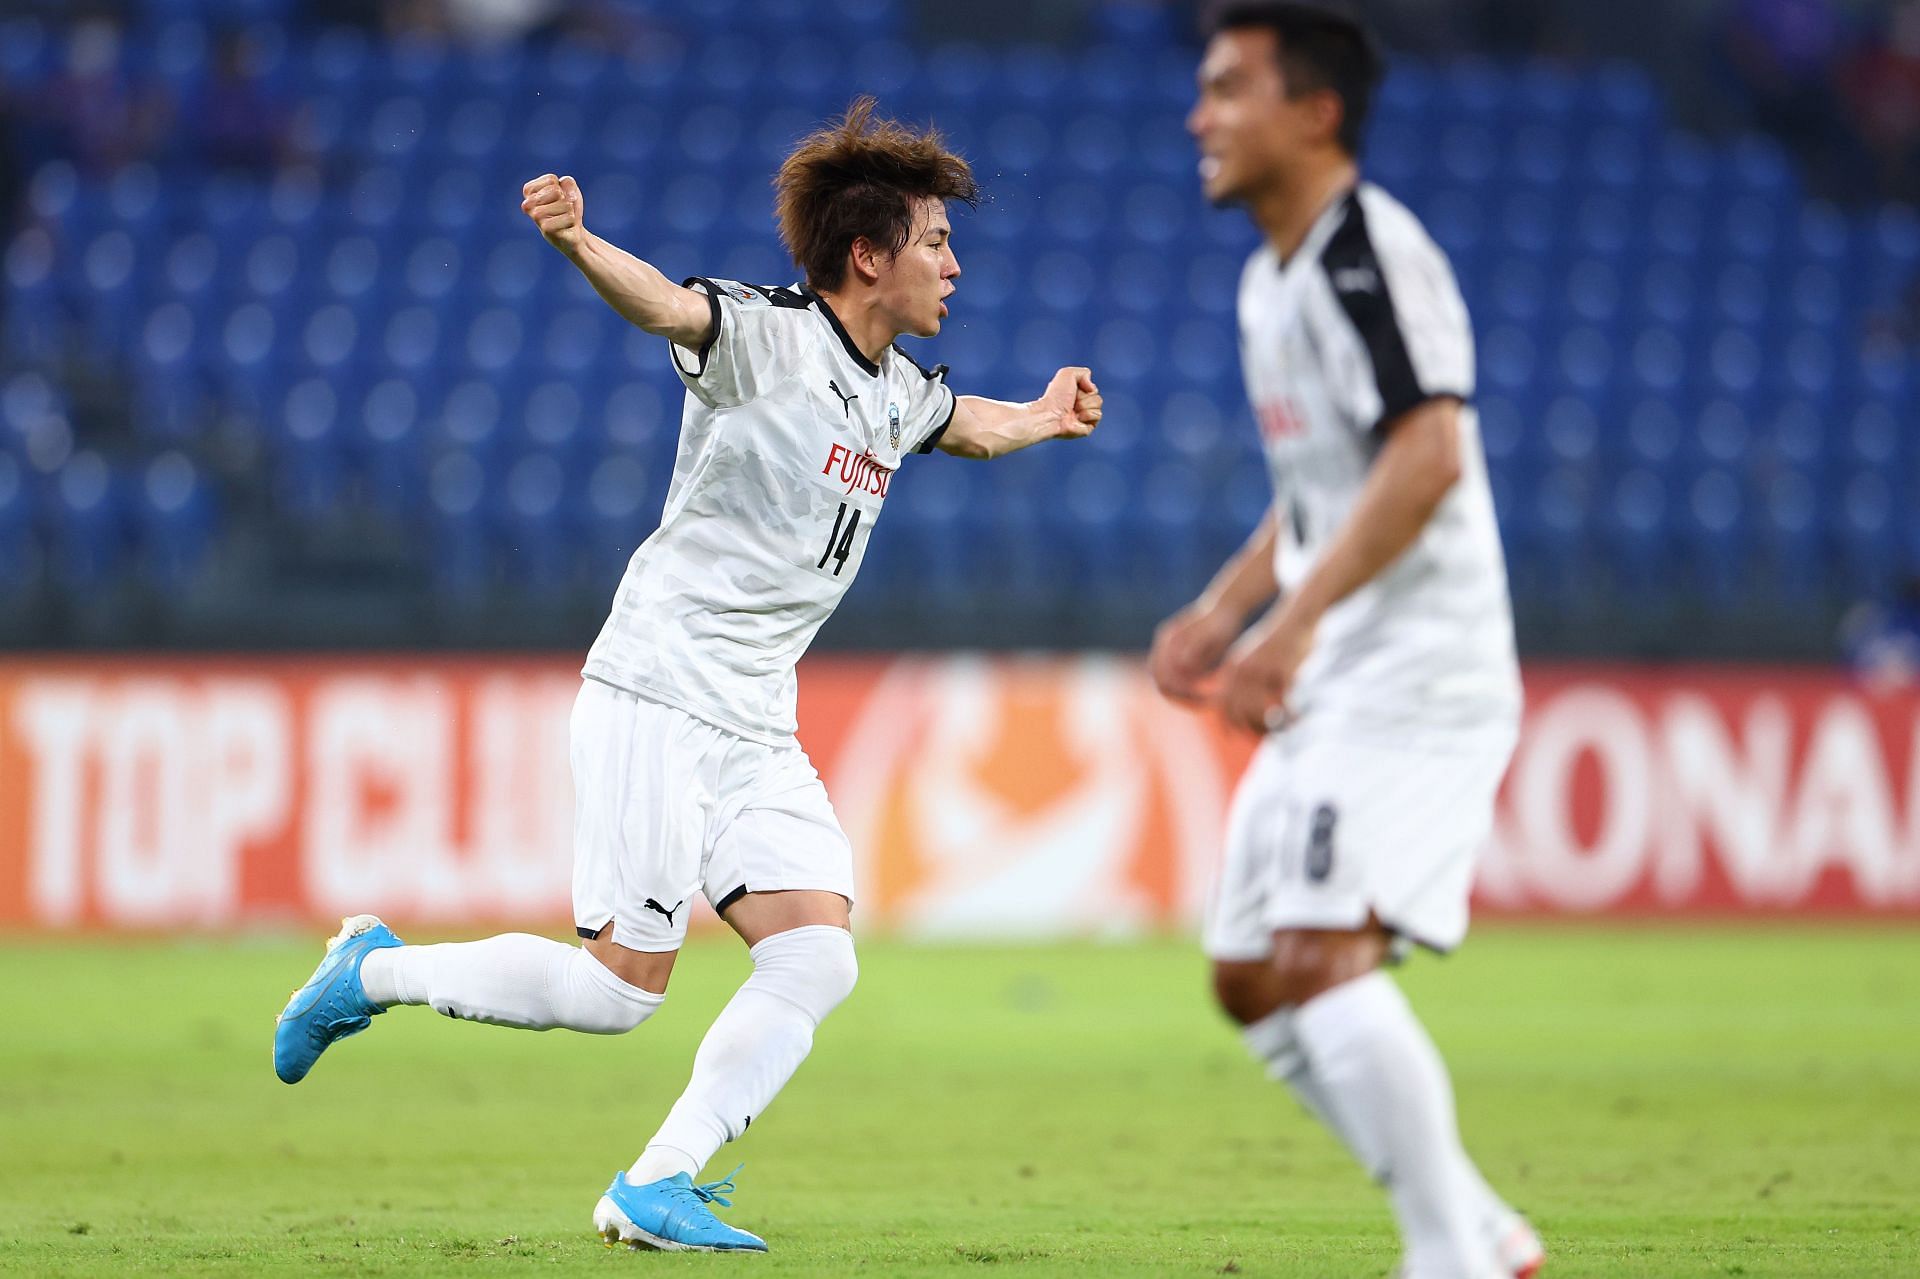 Kawasaki Frontale will face Guangzhou FC in the AFC Champions League Group I